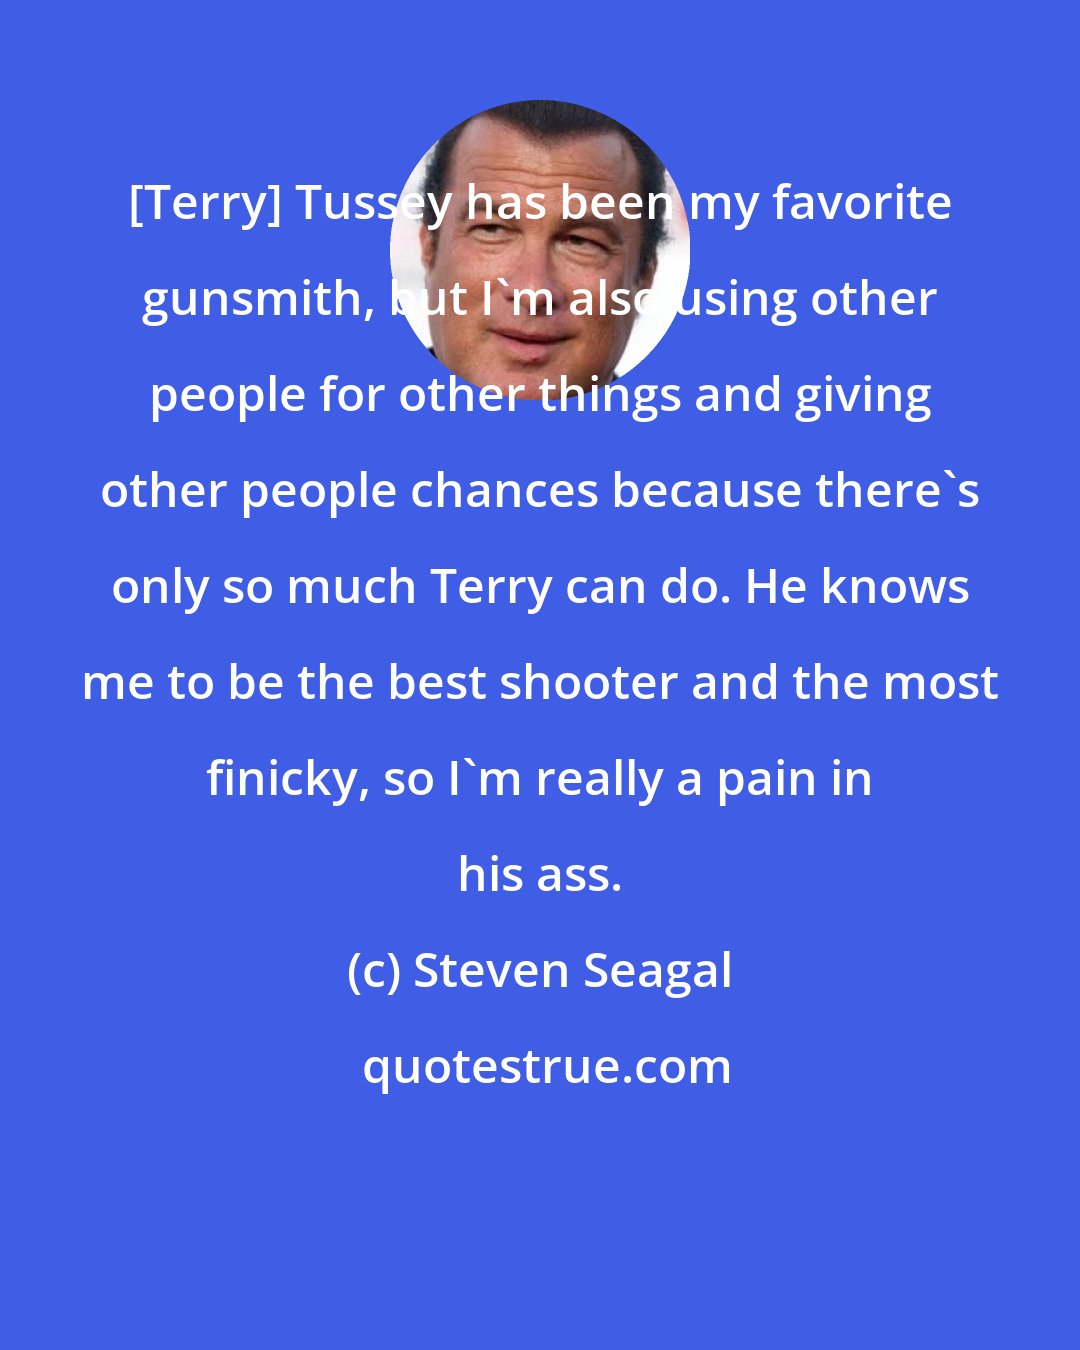 Steven Seagal: [Terry] Tussey has been my favorite gunsmith, but I'm also using other people for other things and giving other people chances because there's only so much Terry can do. He knows me to be the best shooter and the most finicky, so I'm really a pain in his ass.